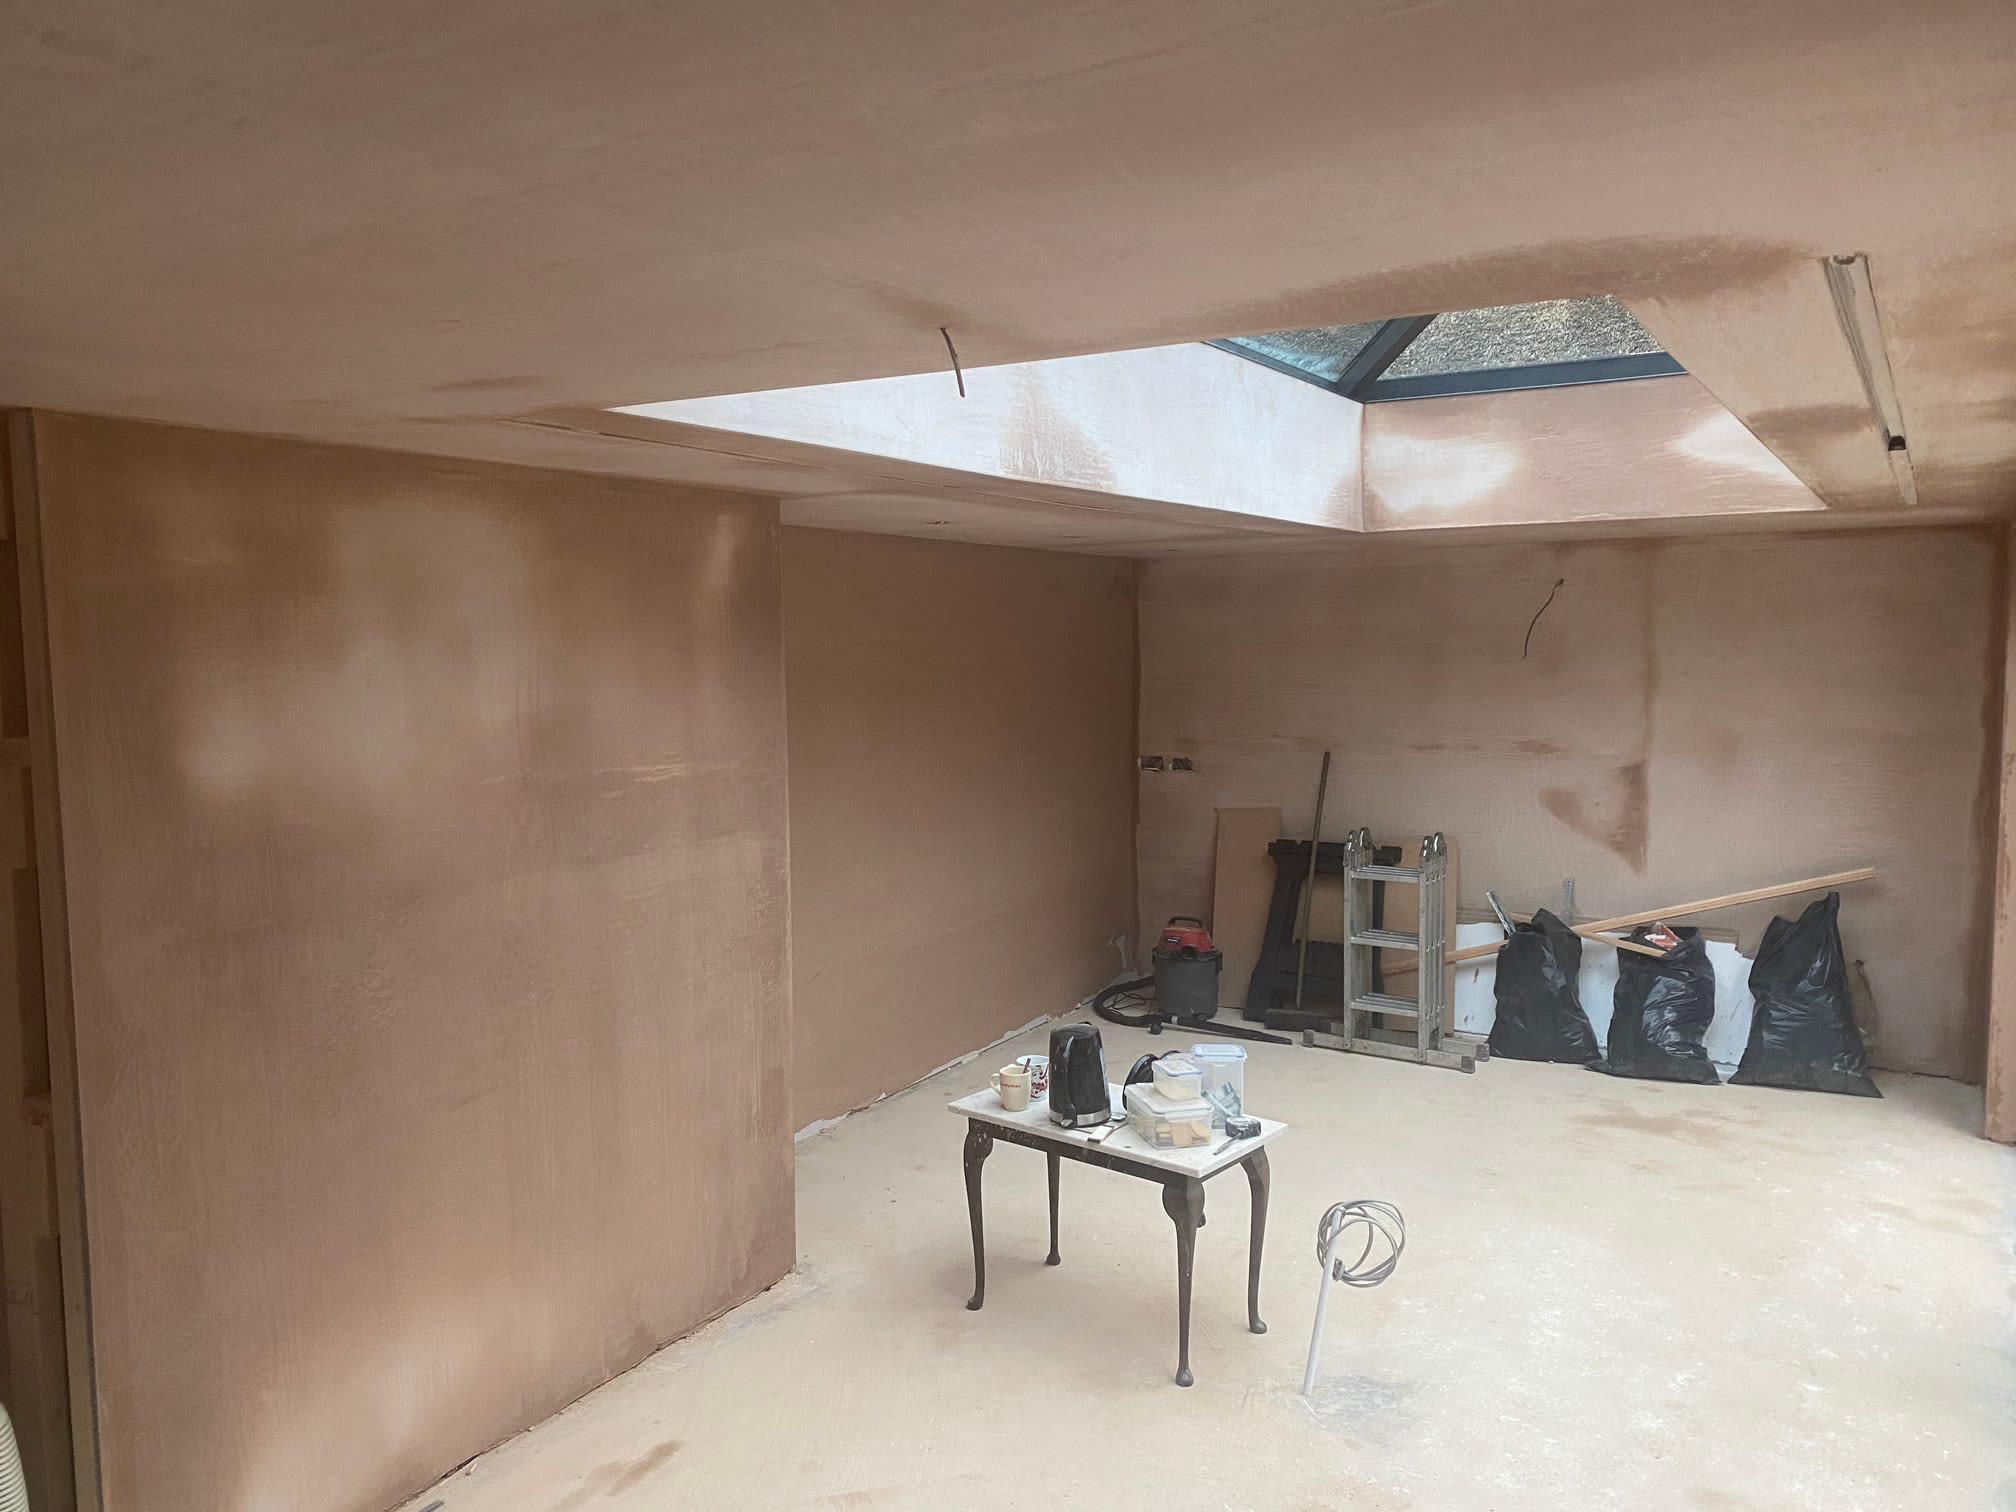 Images A B Plastering